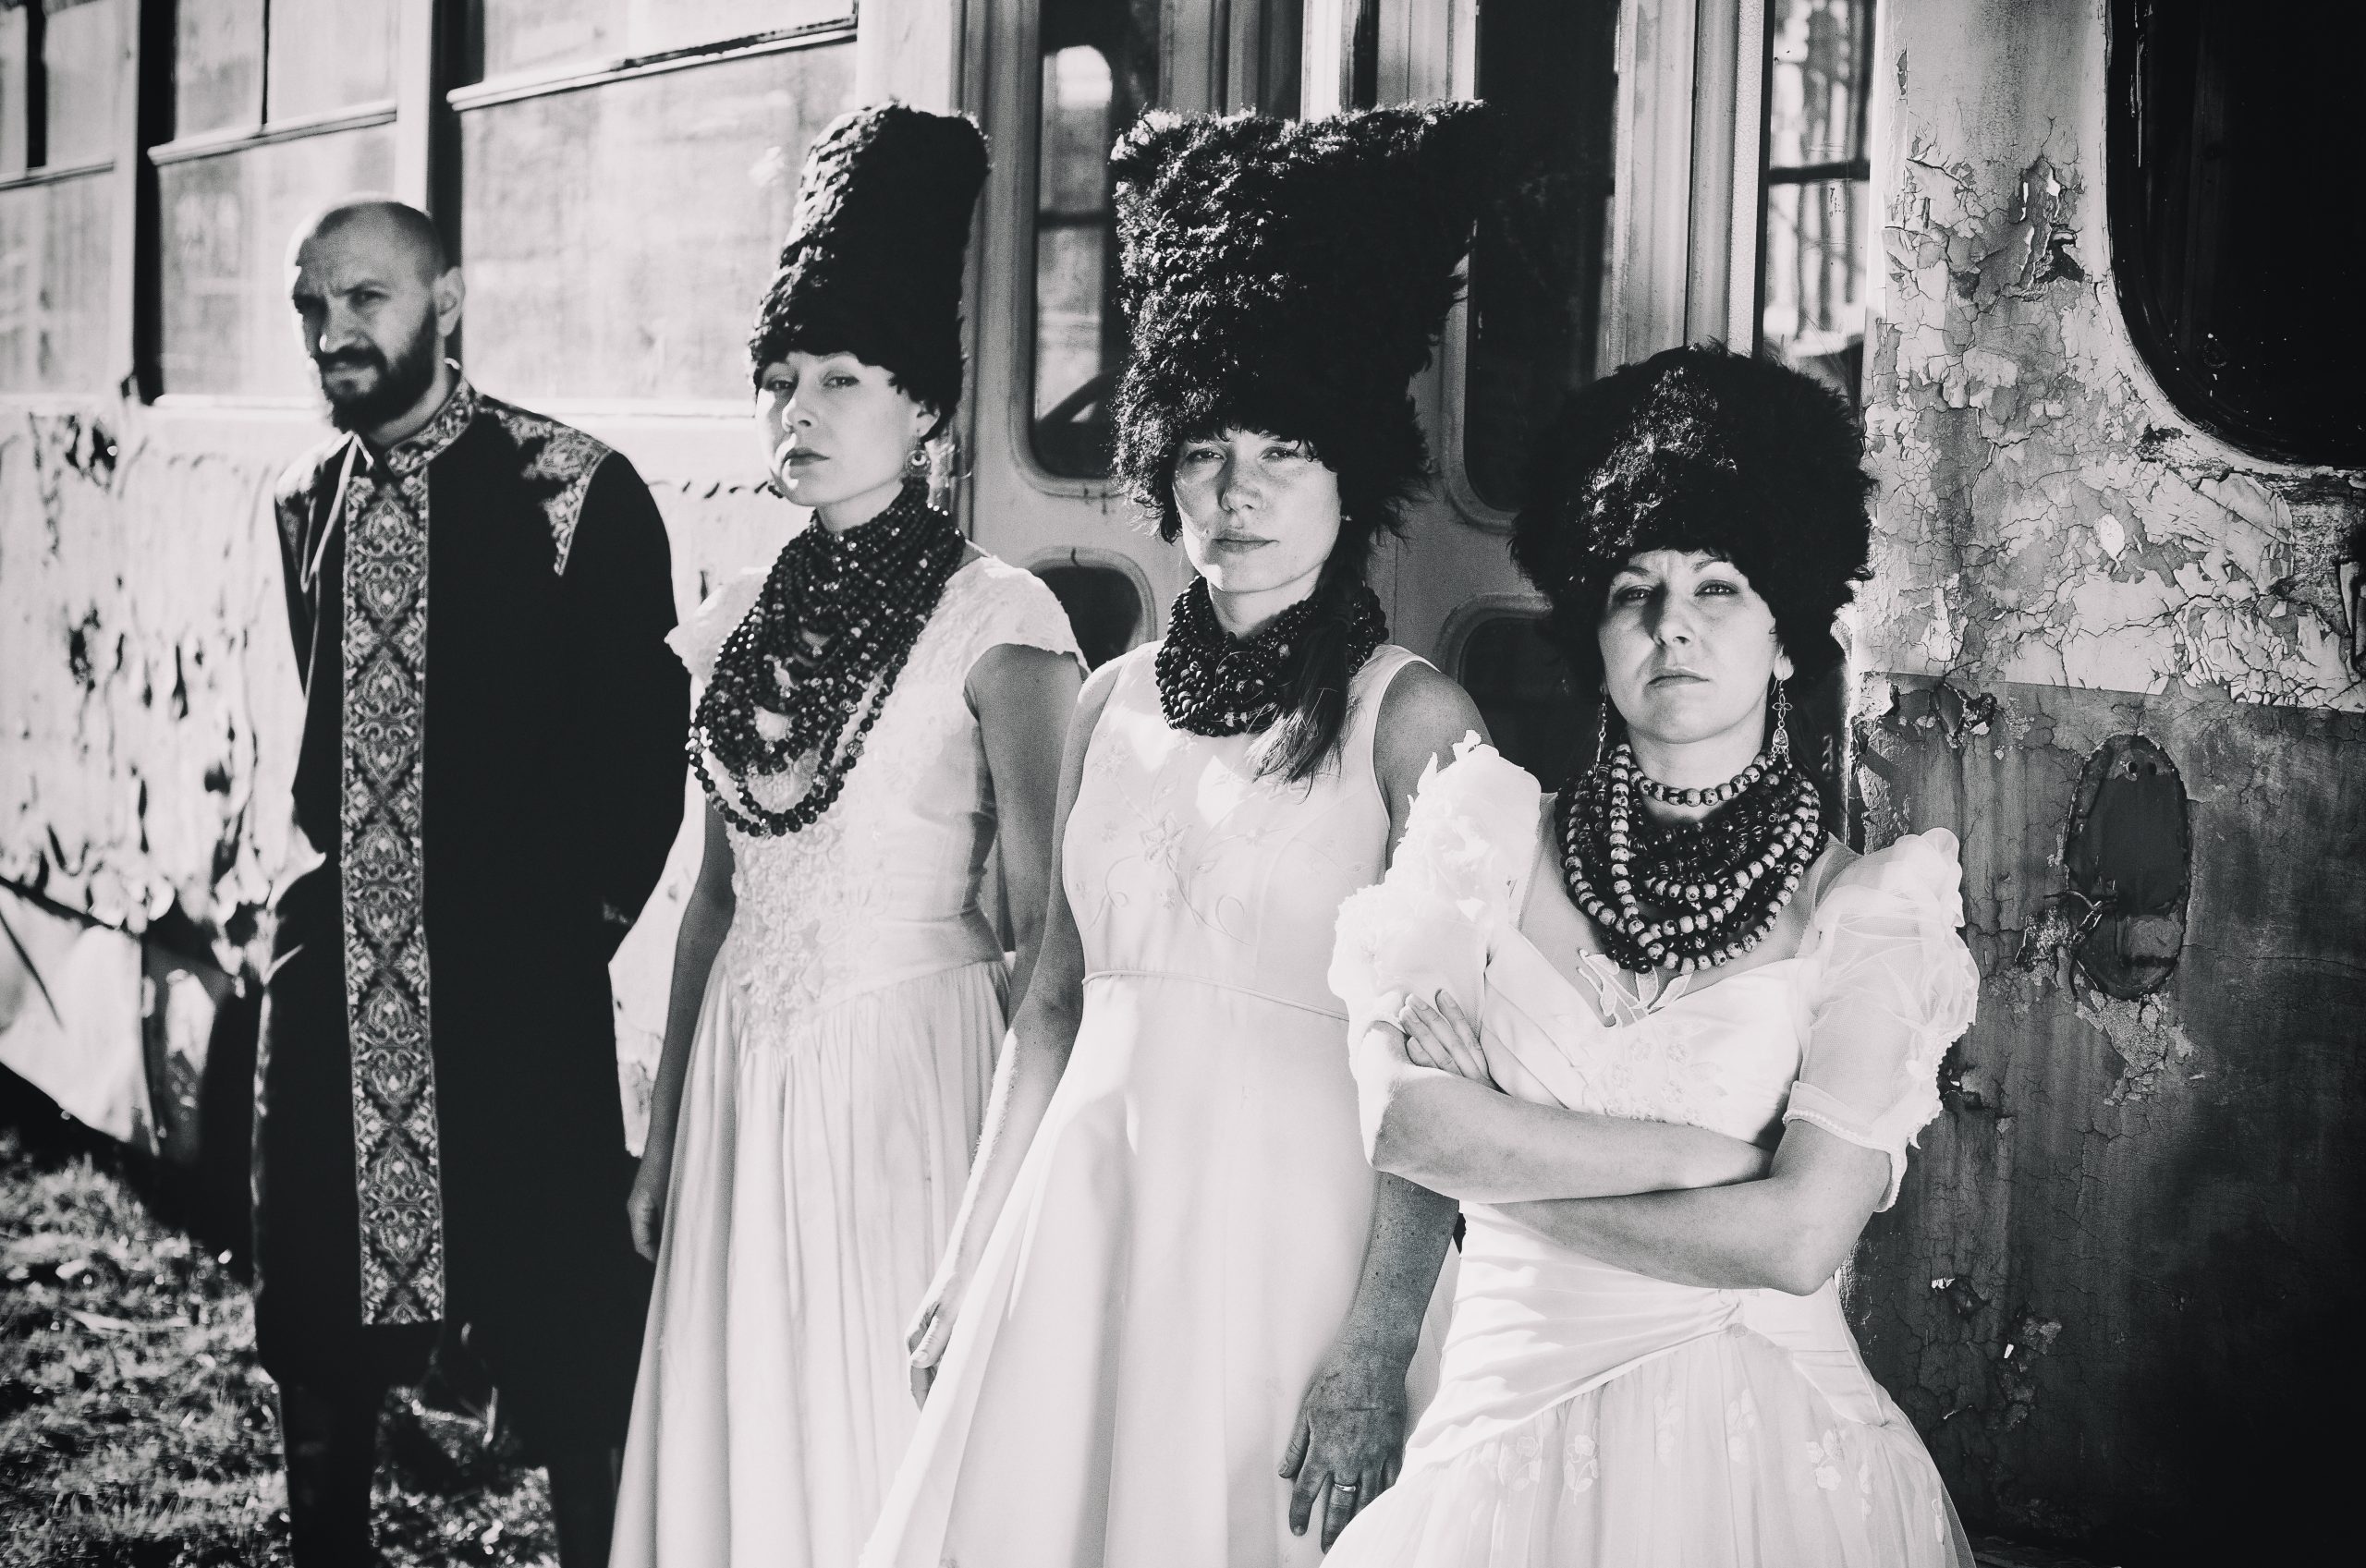 The members of Dakha Brakha wearing traditional Ukrainian garbs staring at the camera seriously. The photo is black and white.